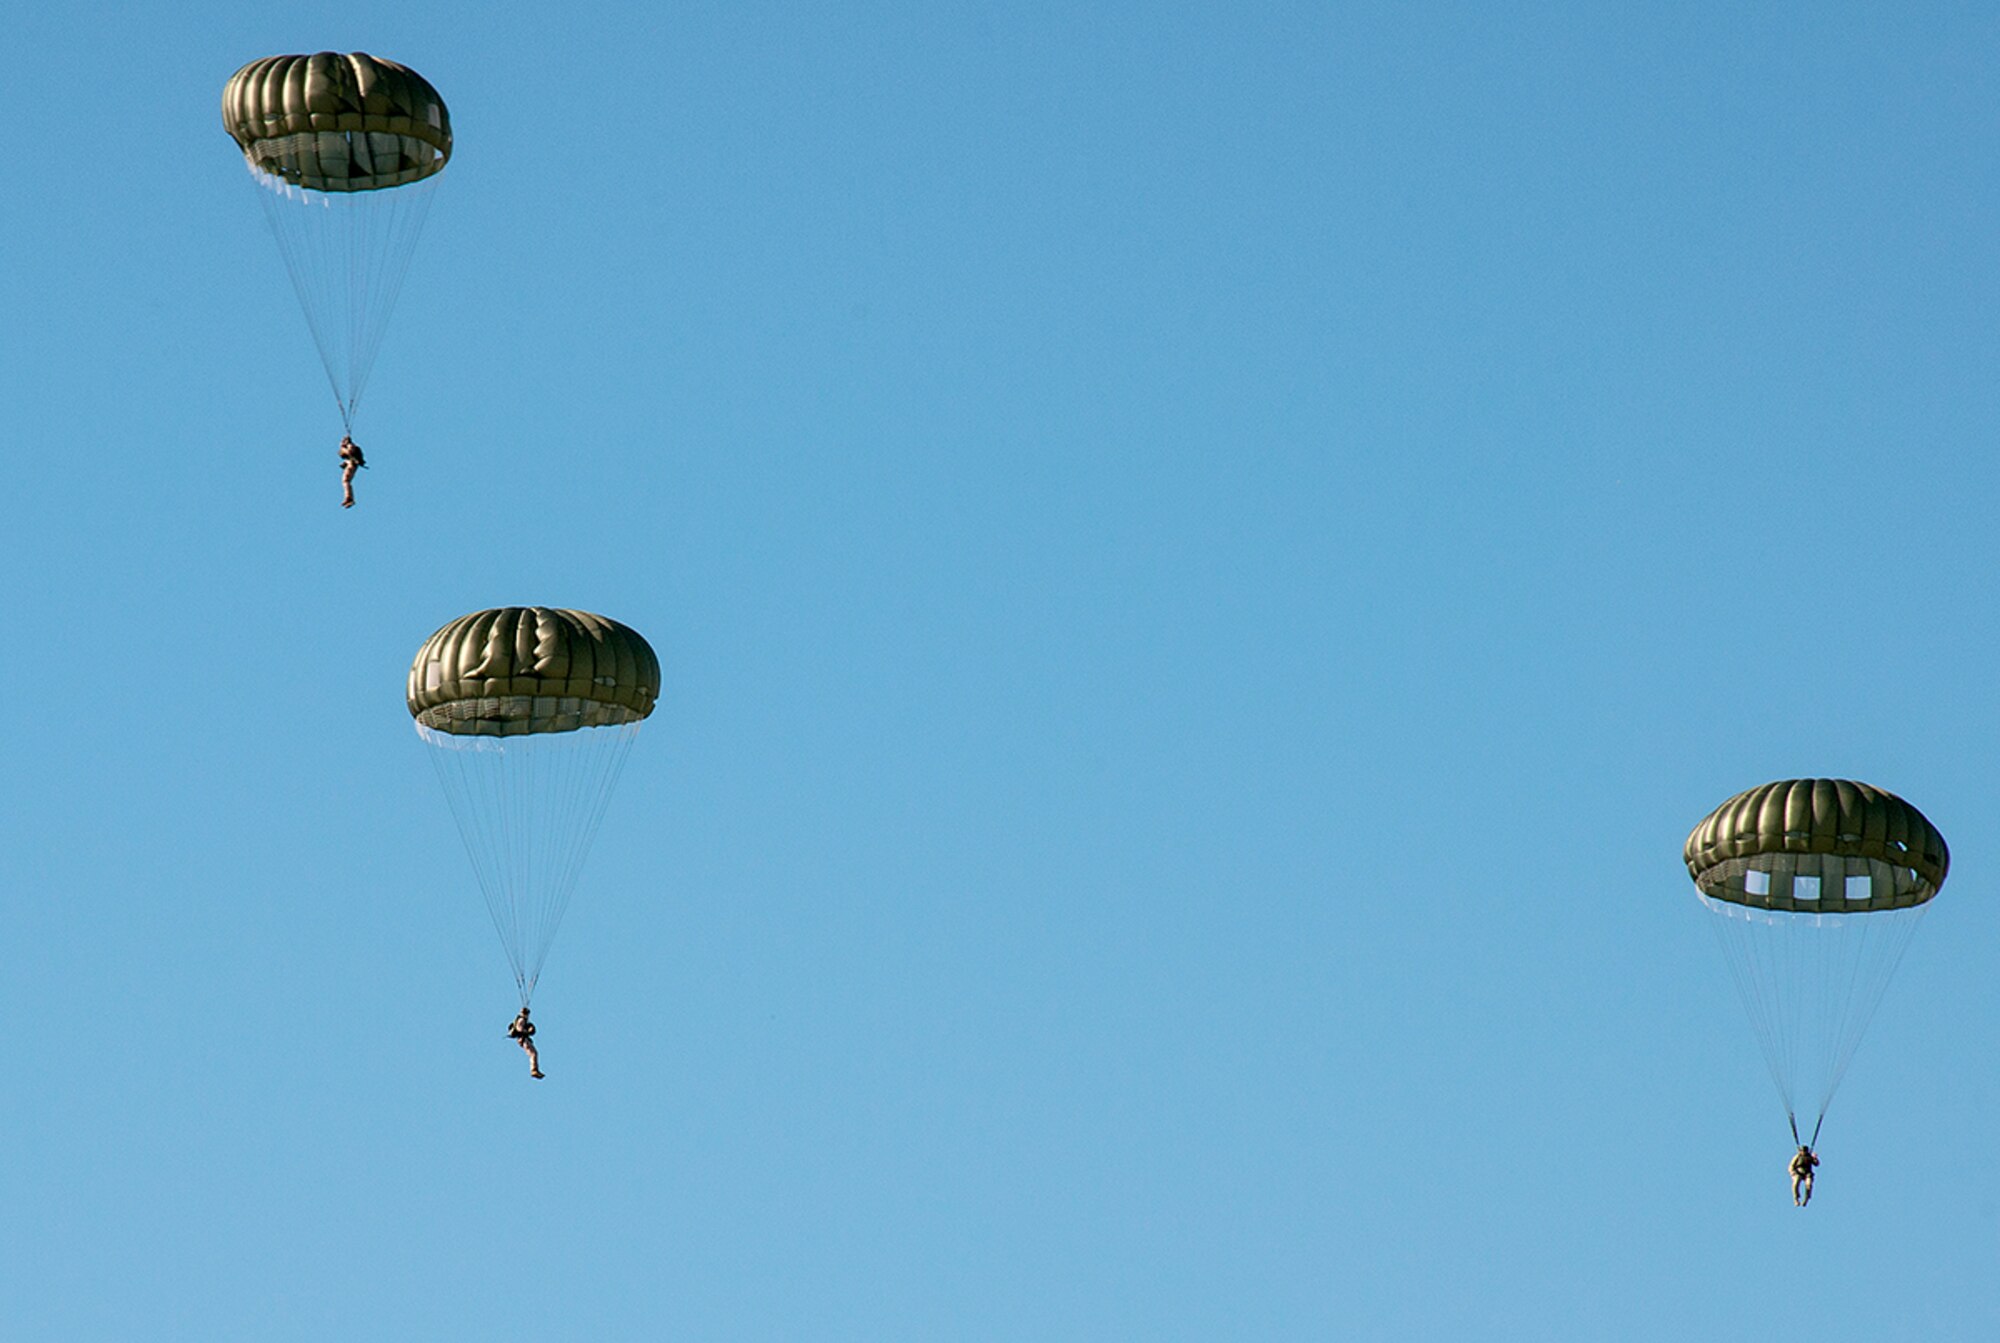 Marines from the 4th Recon Battalion Bravo Company parachute from an U.S. Air Force C-130 Hercules over the Dobbins Air Reserve Base, Ga. Oct. 15, 2015. The 700th Airlift Squadron performed personnel drops working with 4th Recon Battalion Bravo Company. This exercise marked the first time in four years that these units had worked together for parachutes jumps. (U.S. Air Force photo/ Staff Sgt. Daniel Phelps)